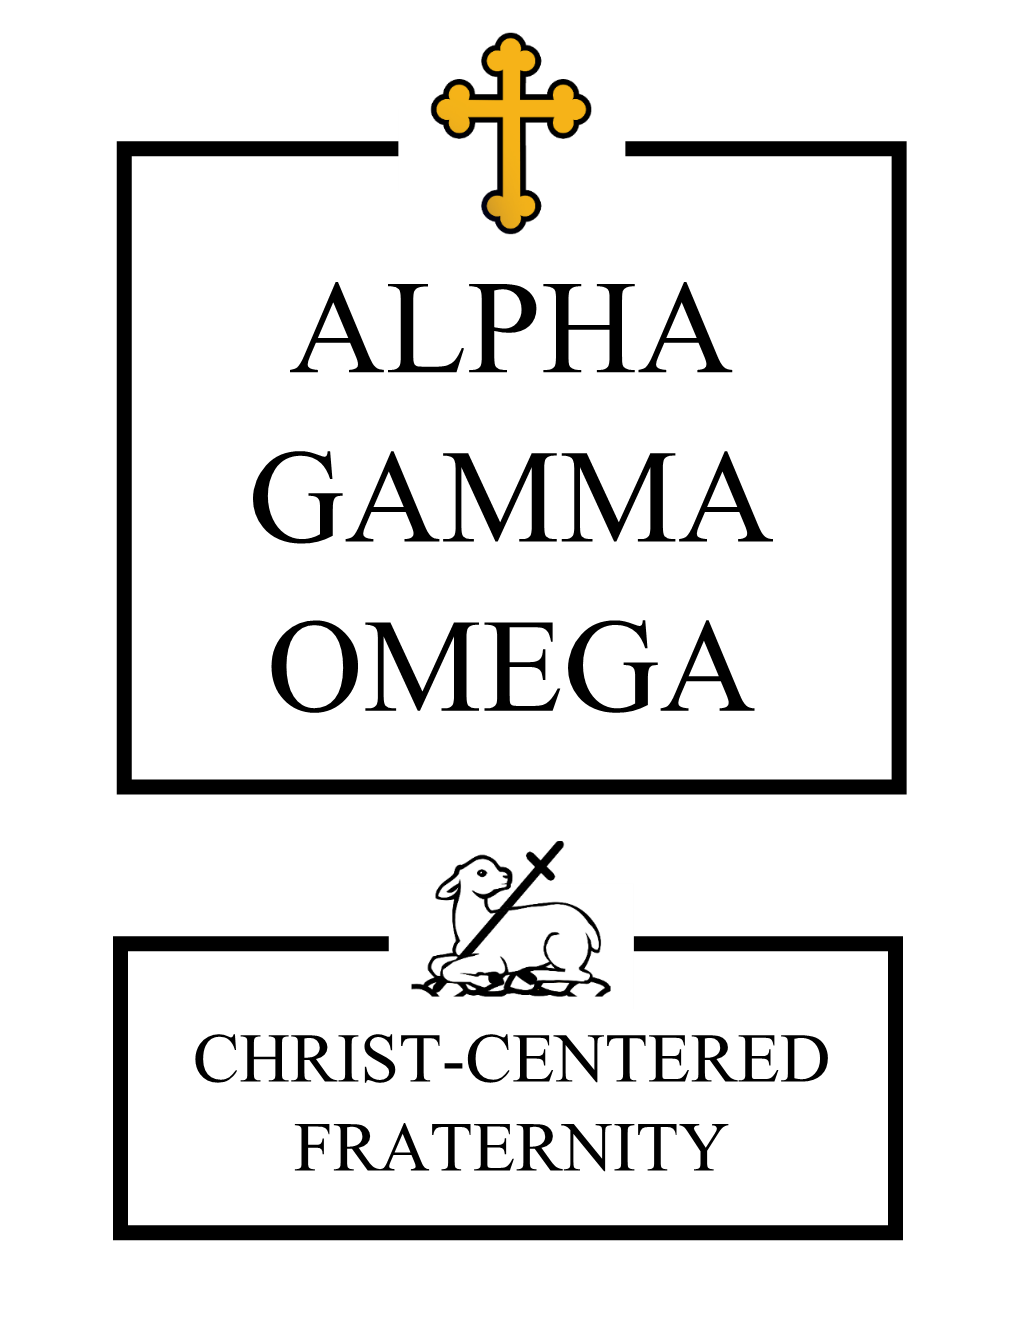 CHRIST-CENTERED FRATERNITY Purposes